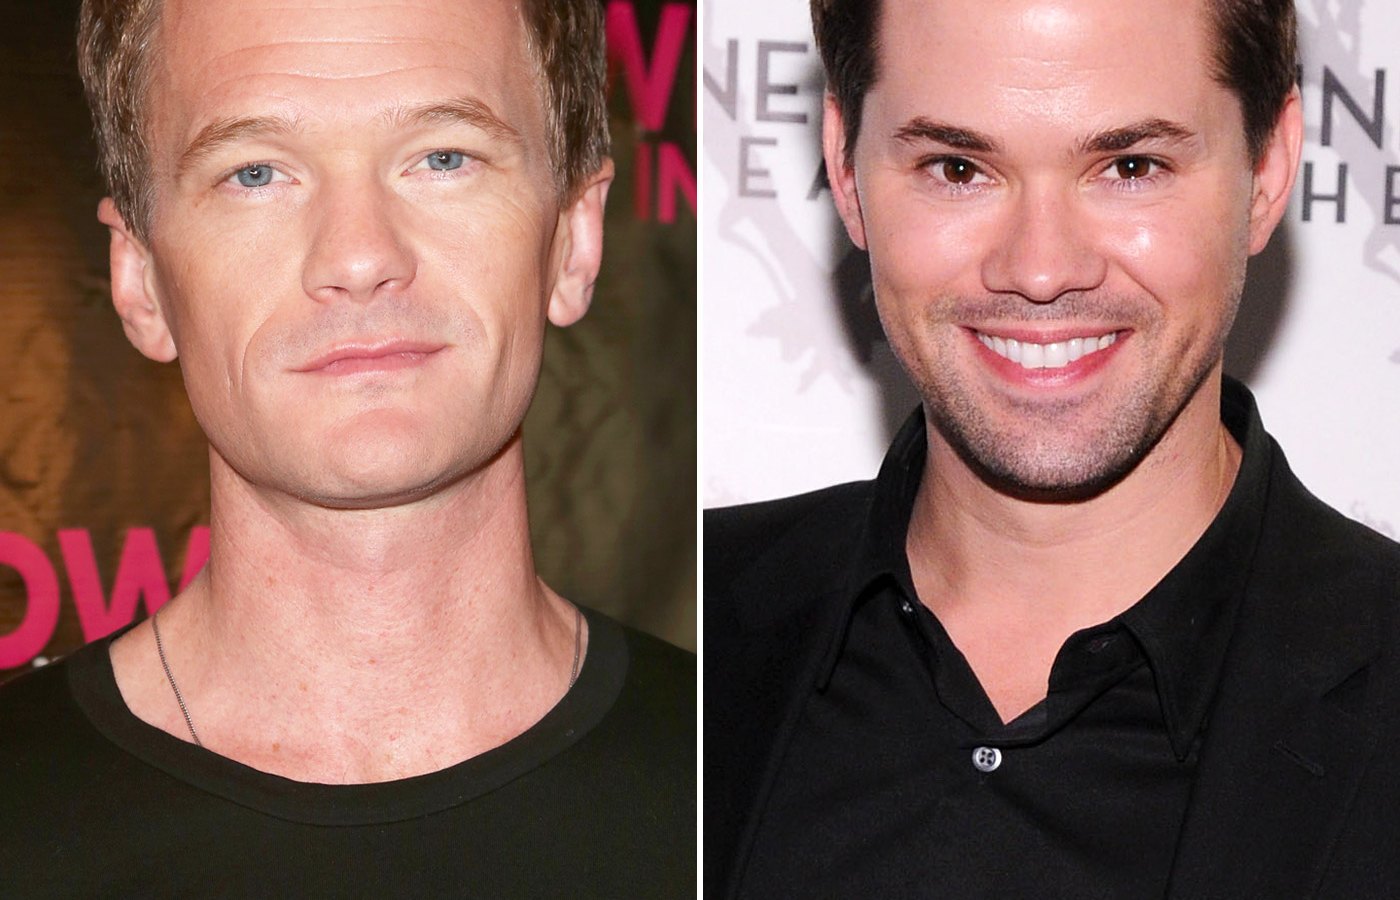 Neil Patrick Harris and Andrew Rannels